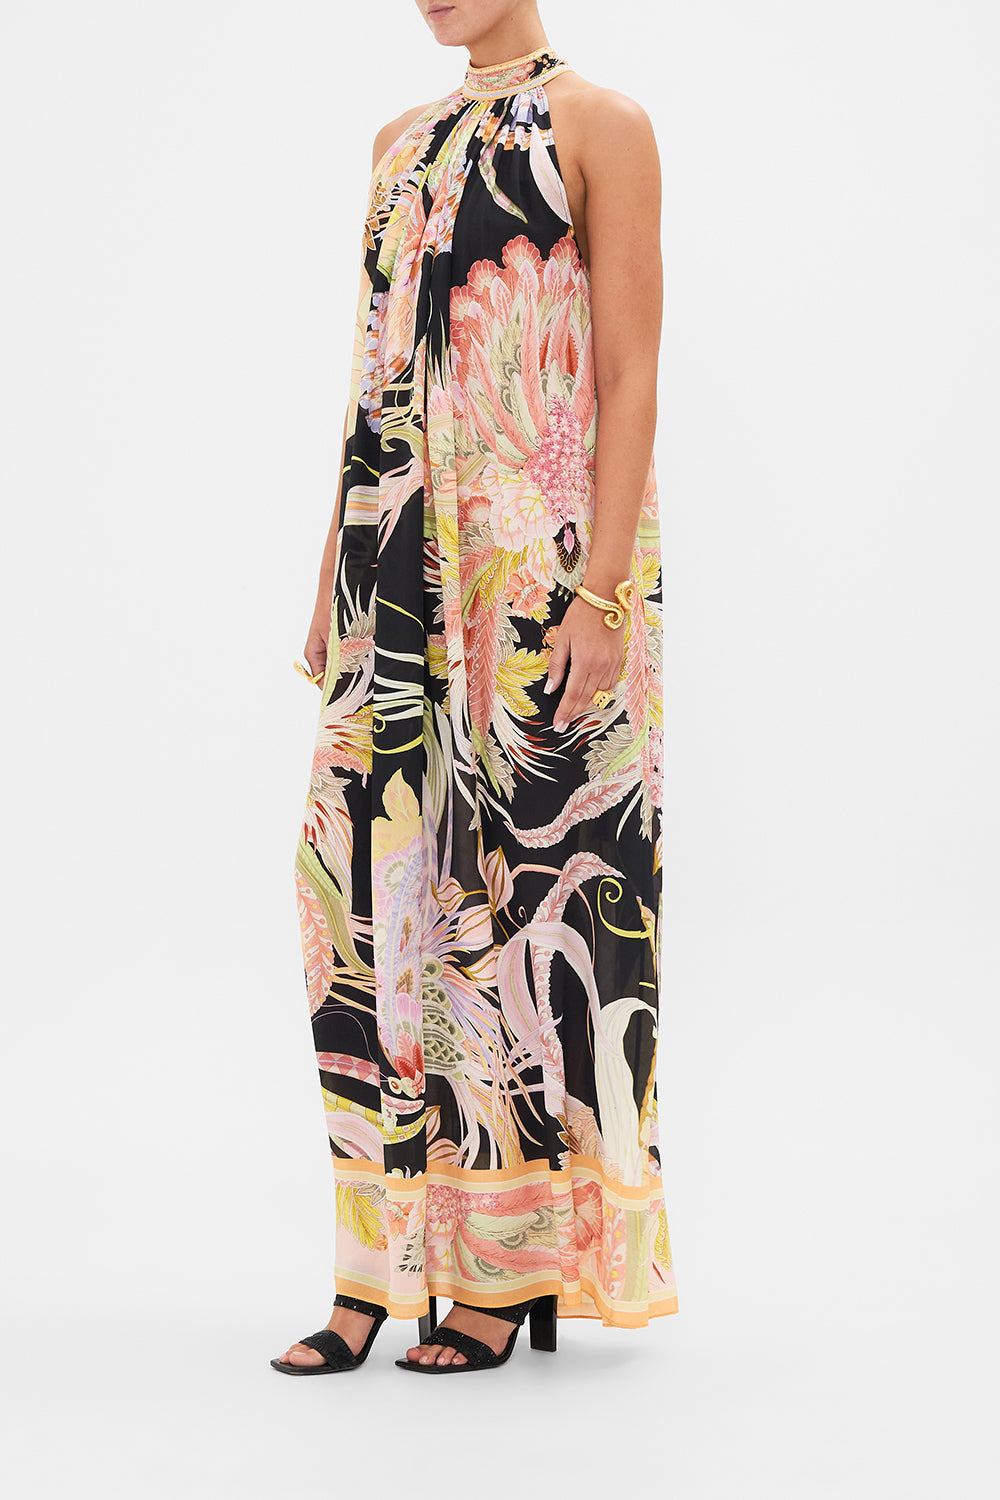 Side view of model wearing CAMILLA silk floral maxi dress in Lady of The Moon print